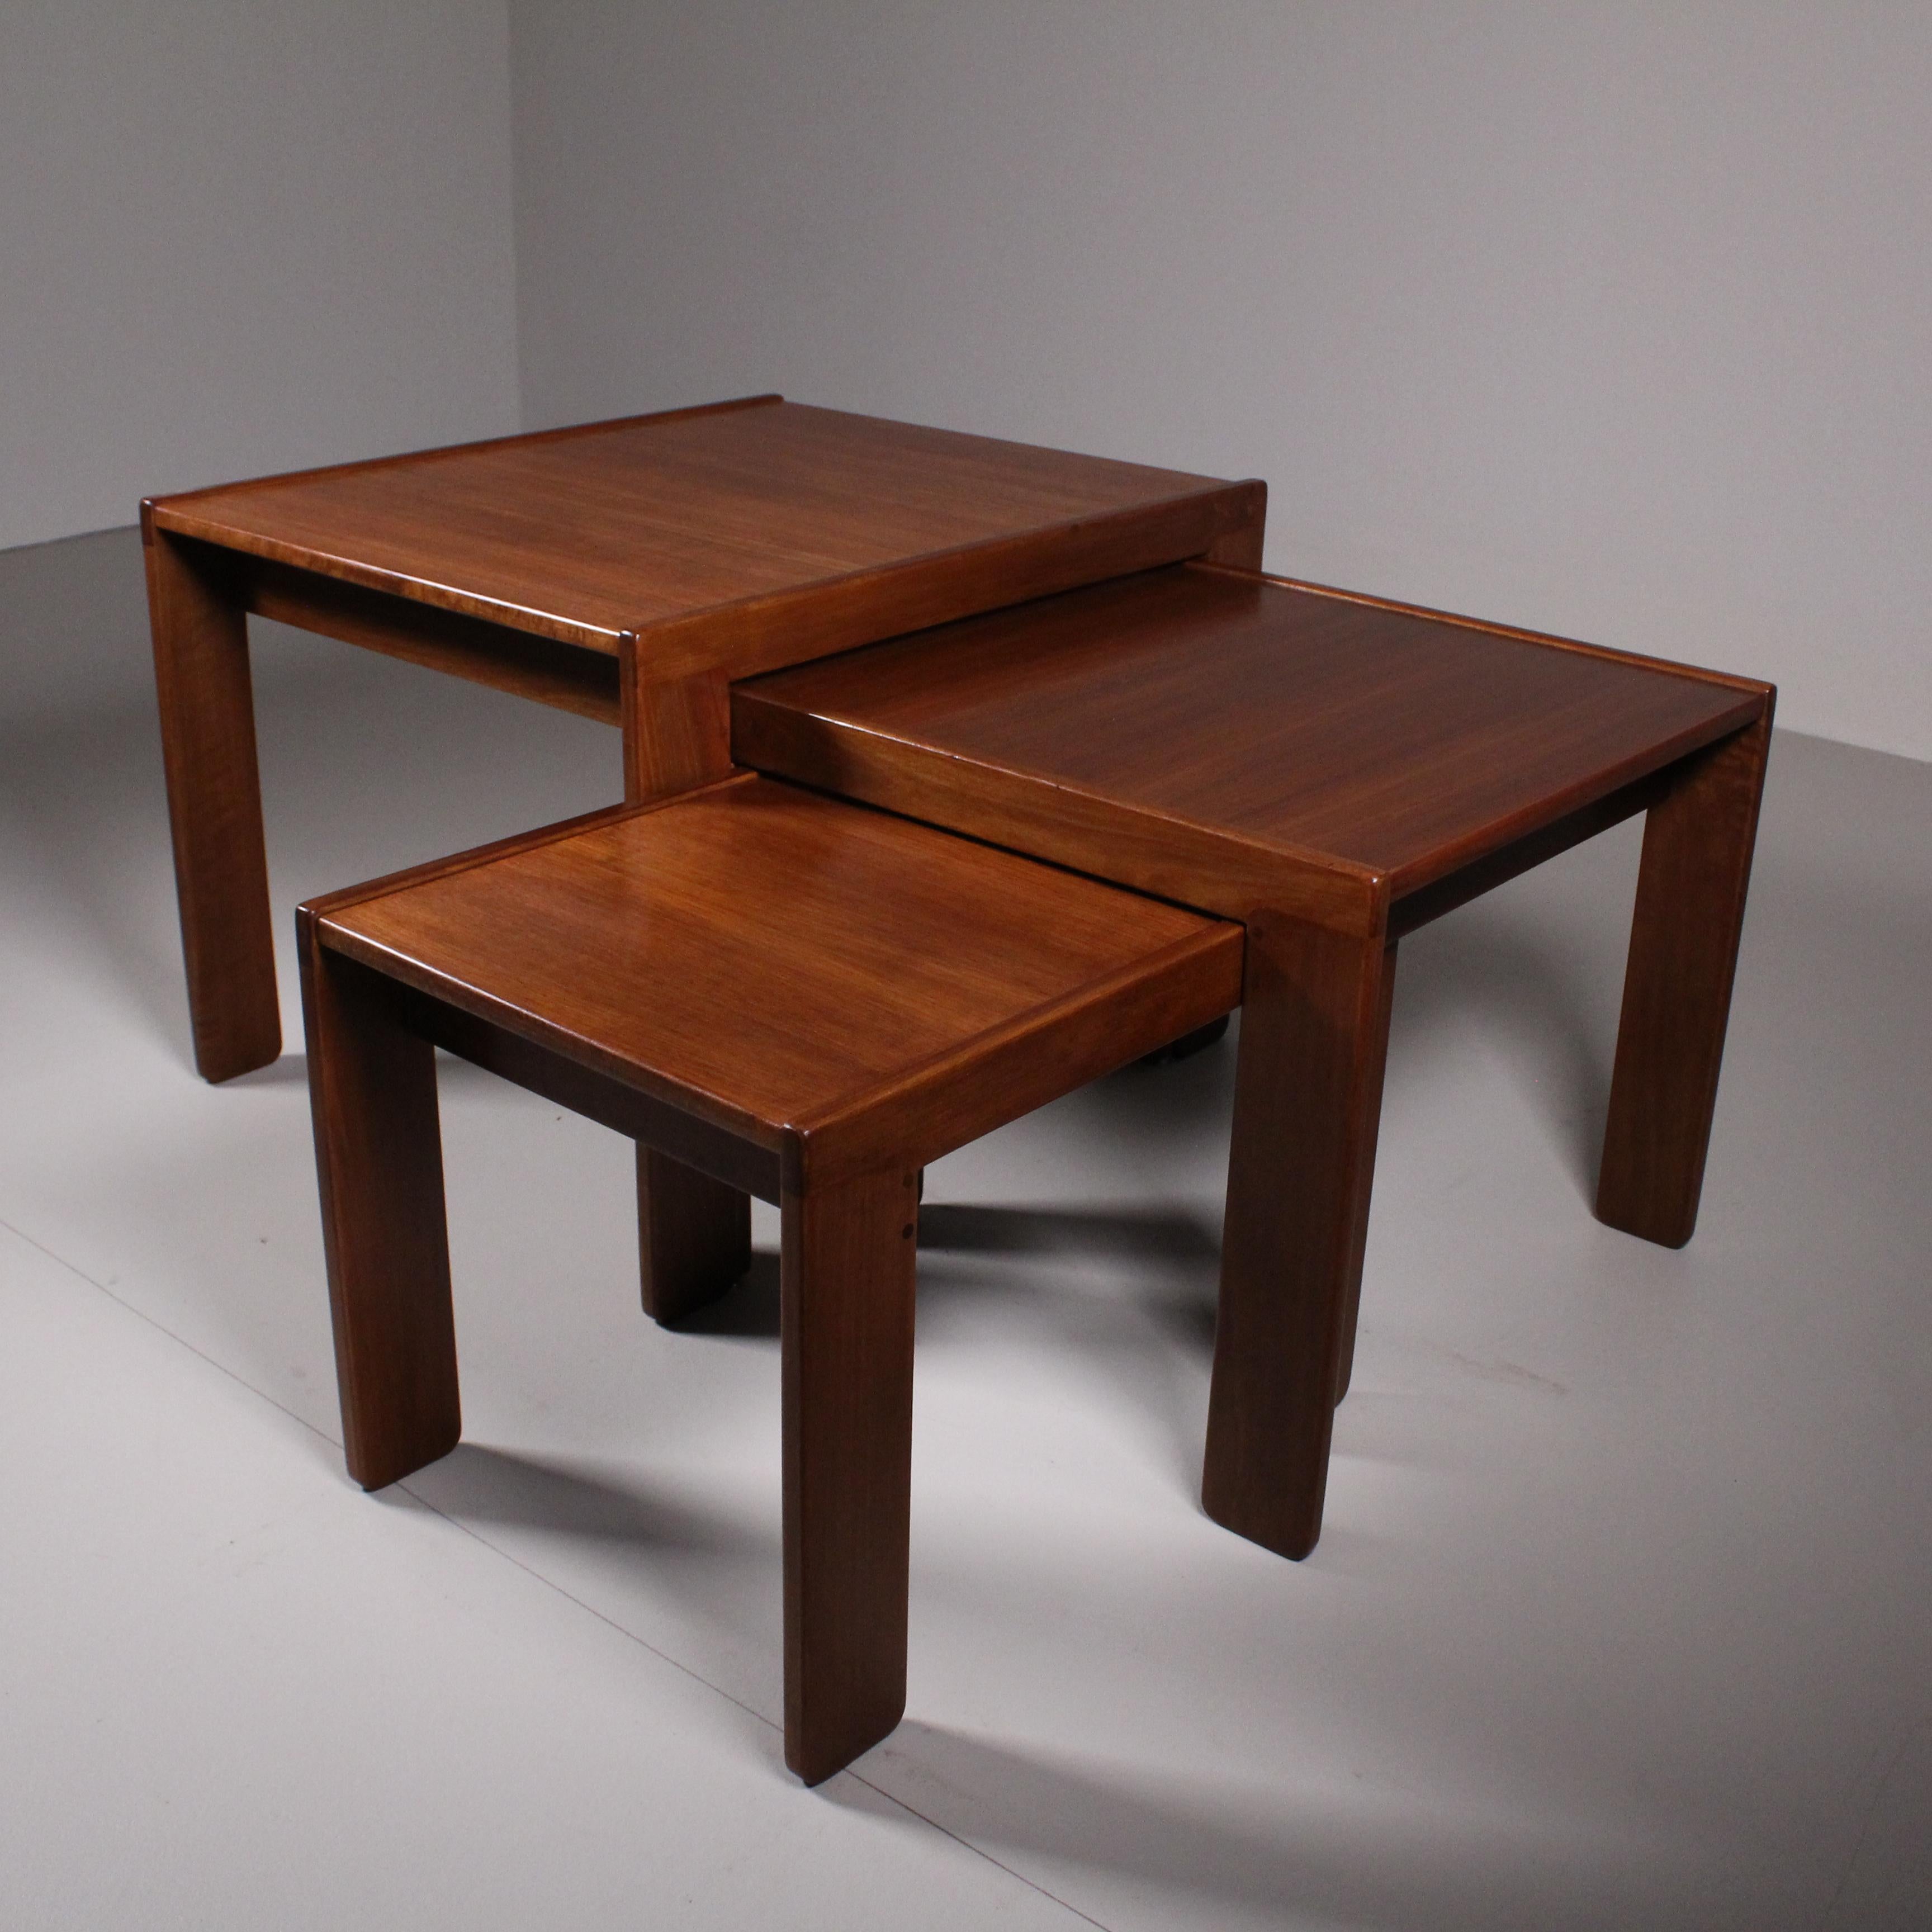 Small tables model 777, Afra and Tobia Scarpa, 1965 Circa For Sale 7